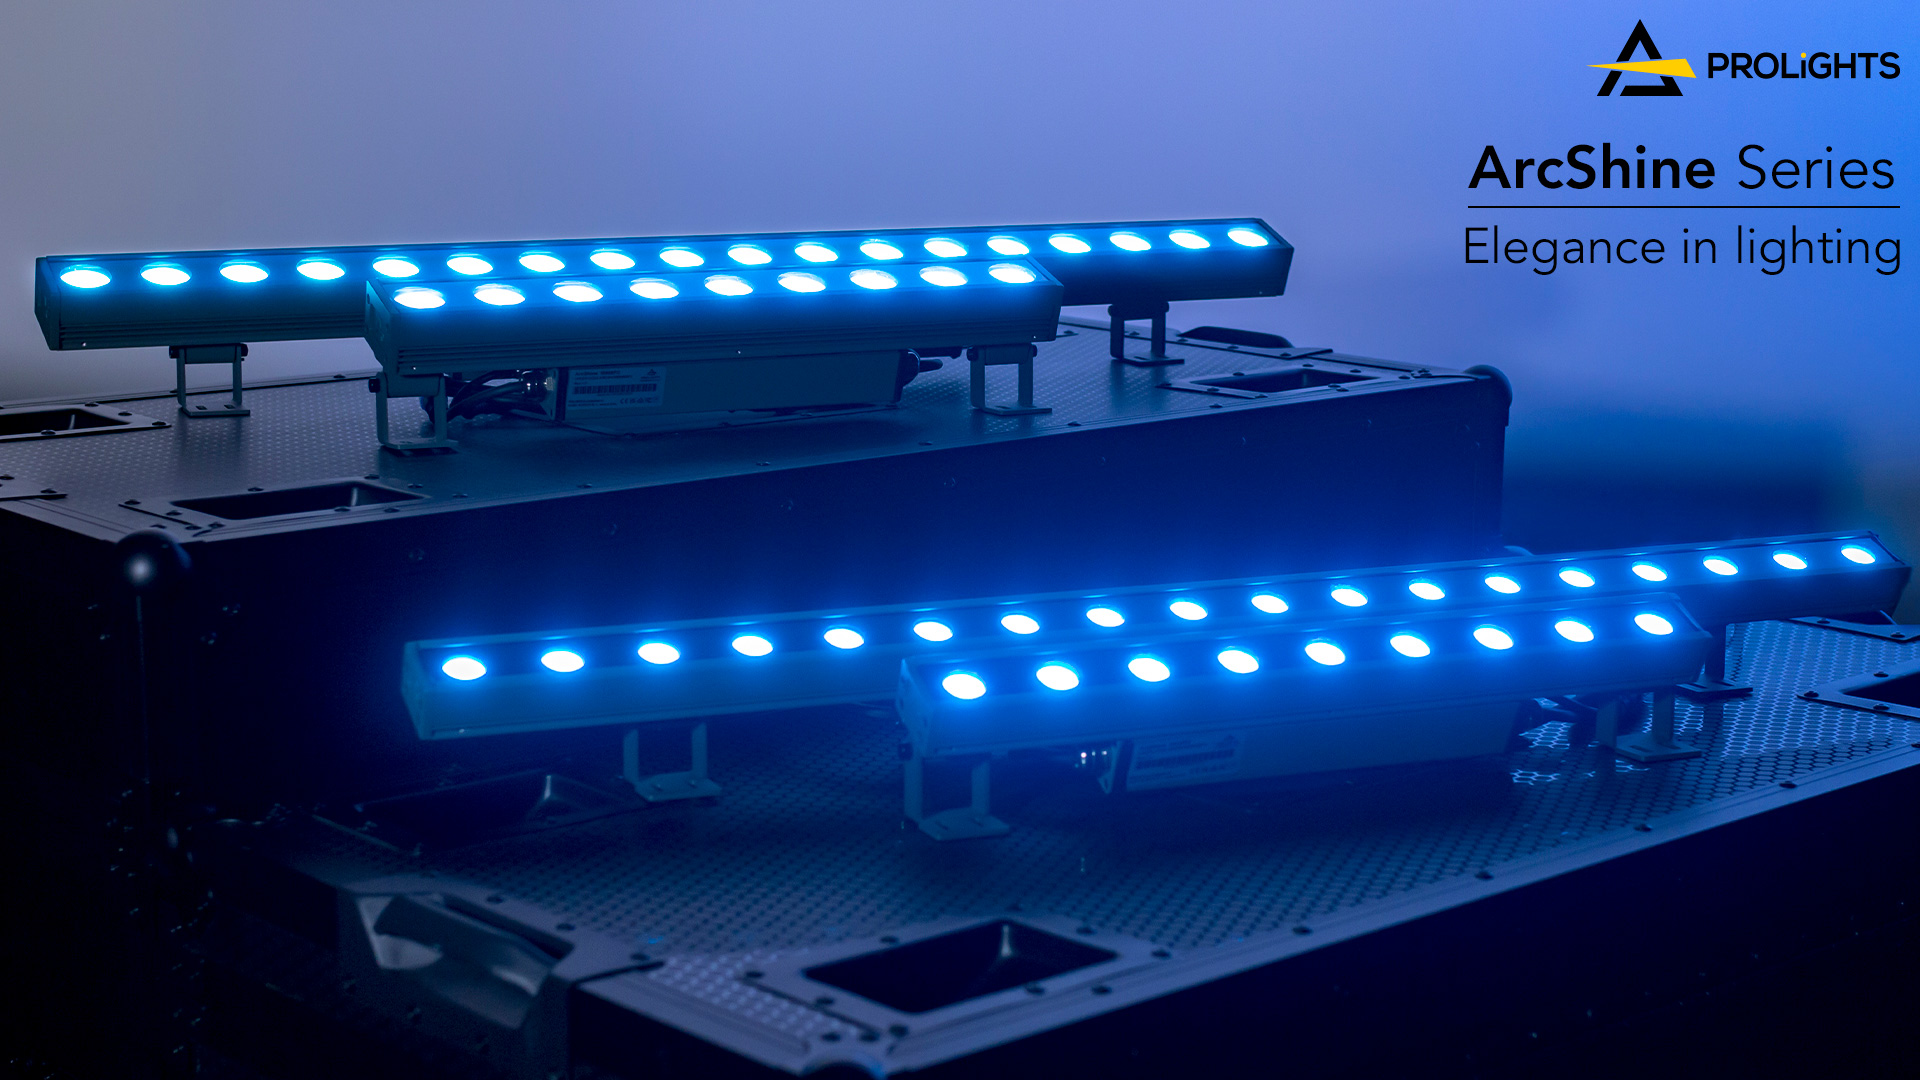 PROLIGHTS adds architectural LED linear fixtures